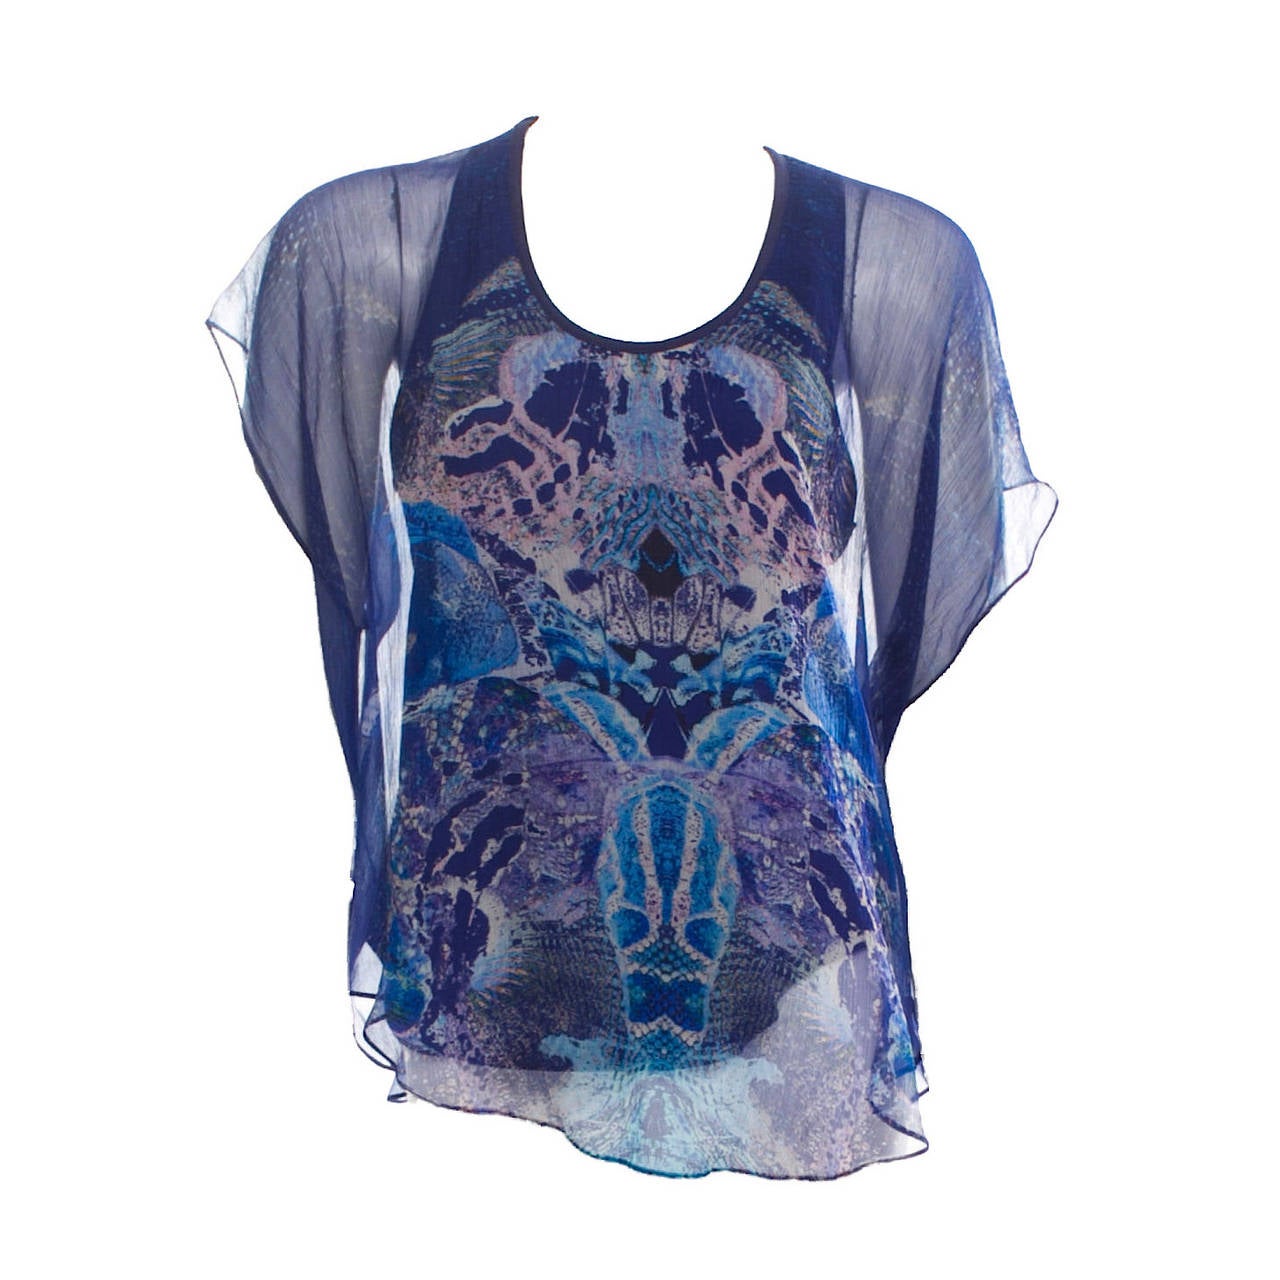 Important Alexander McQueen Blouse from SS 2010 Plato's Atlantis Collection For Sale